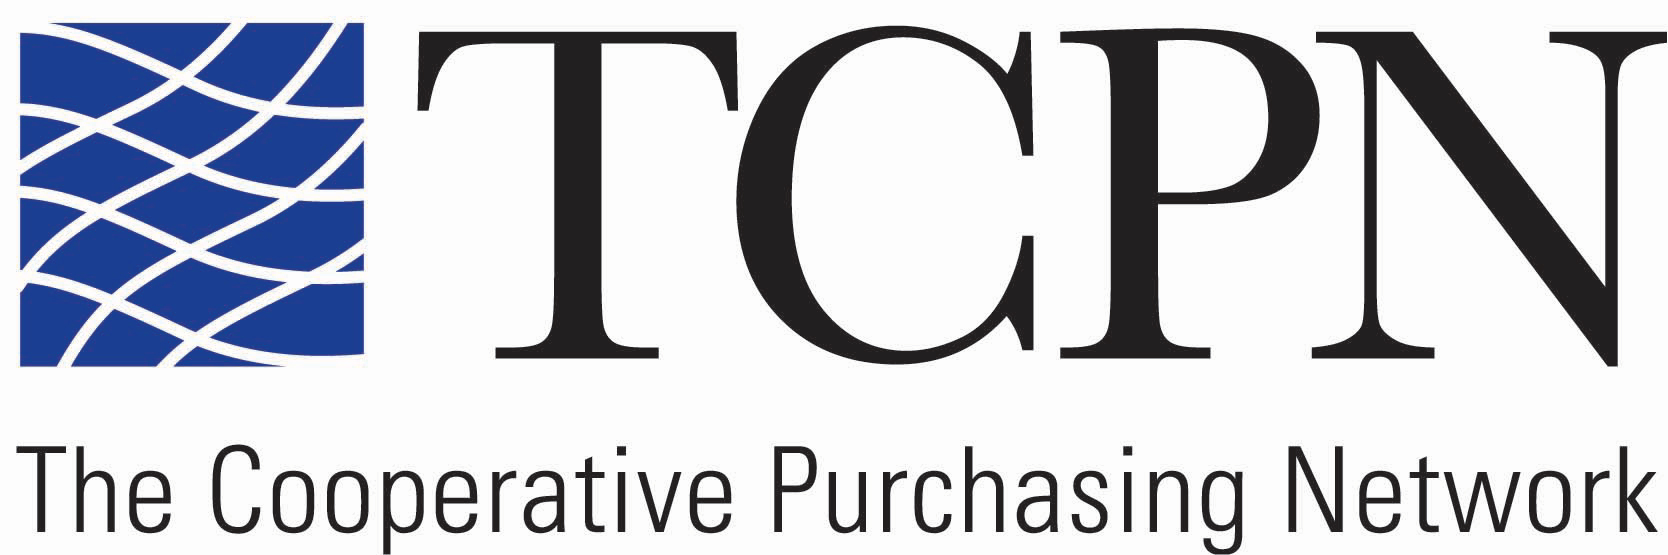 The Cooperative Purchasing Network (TCPN)